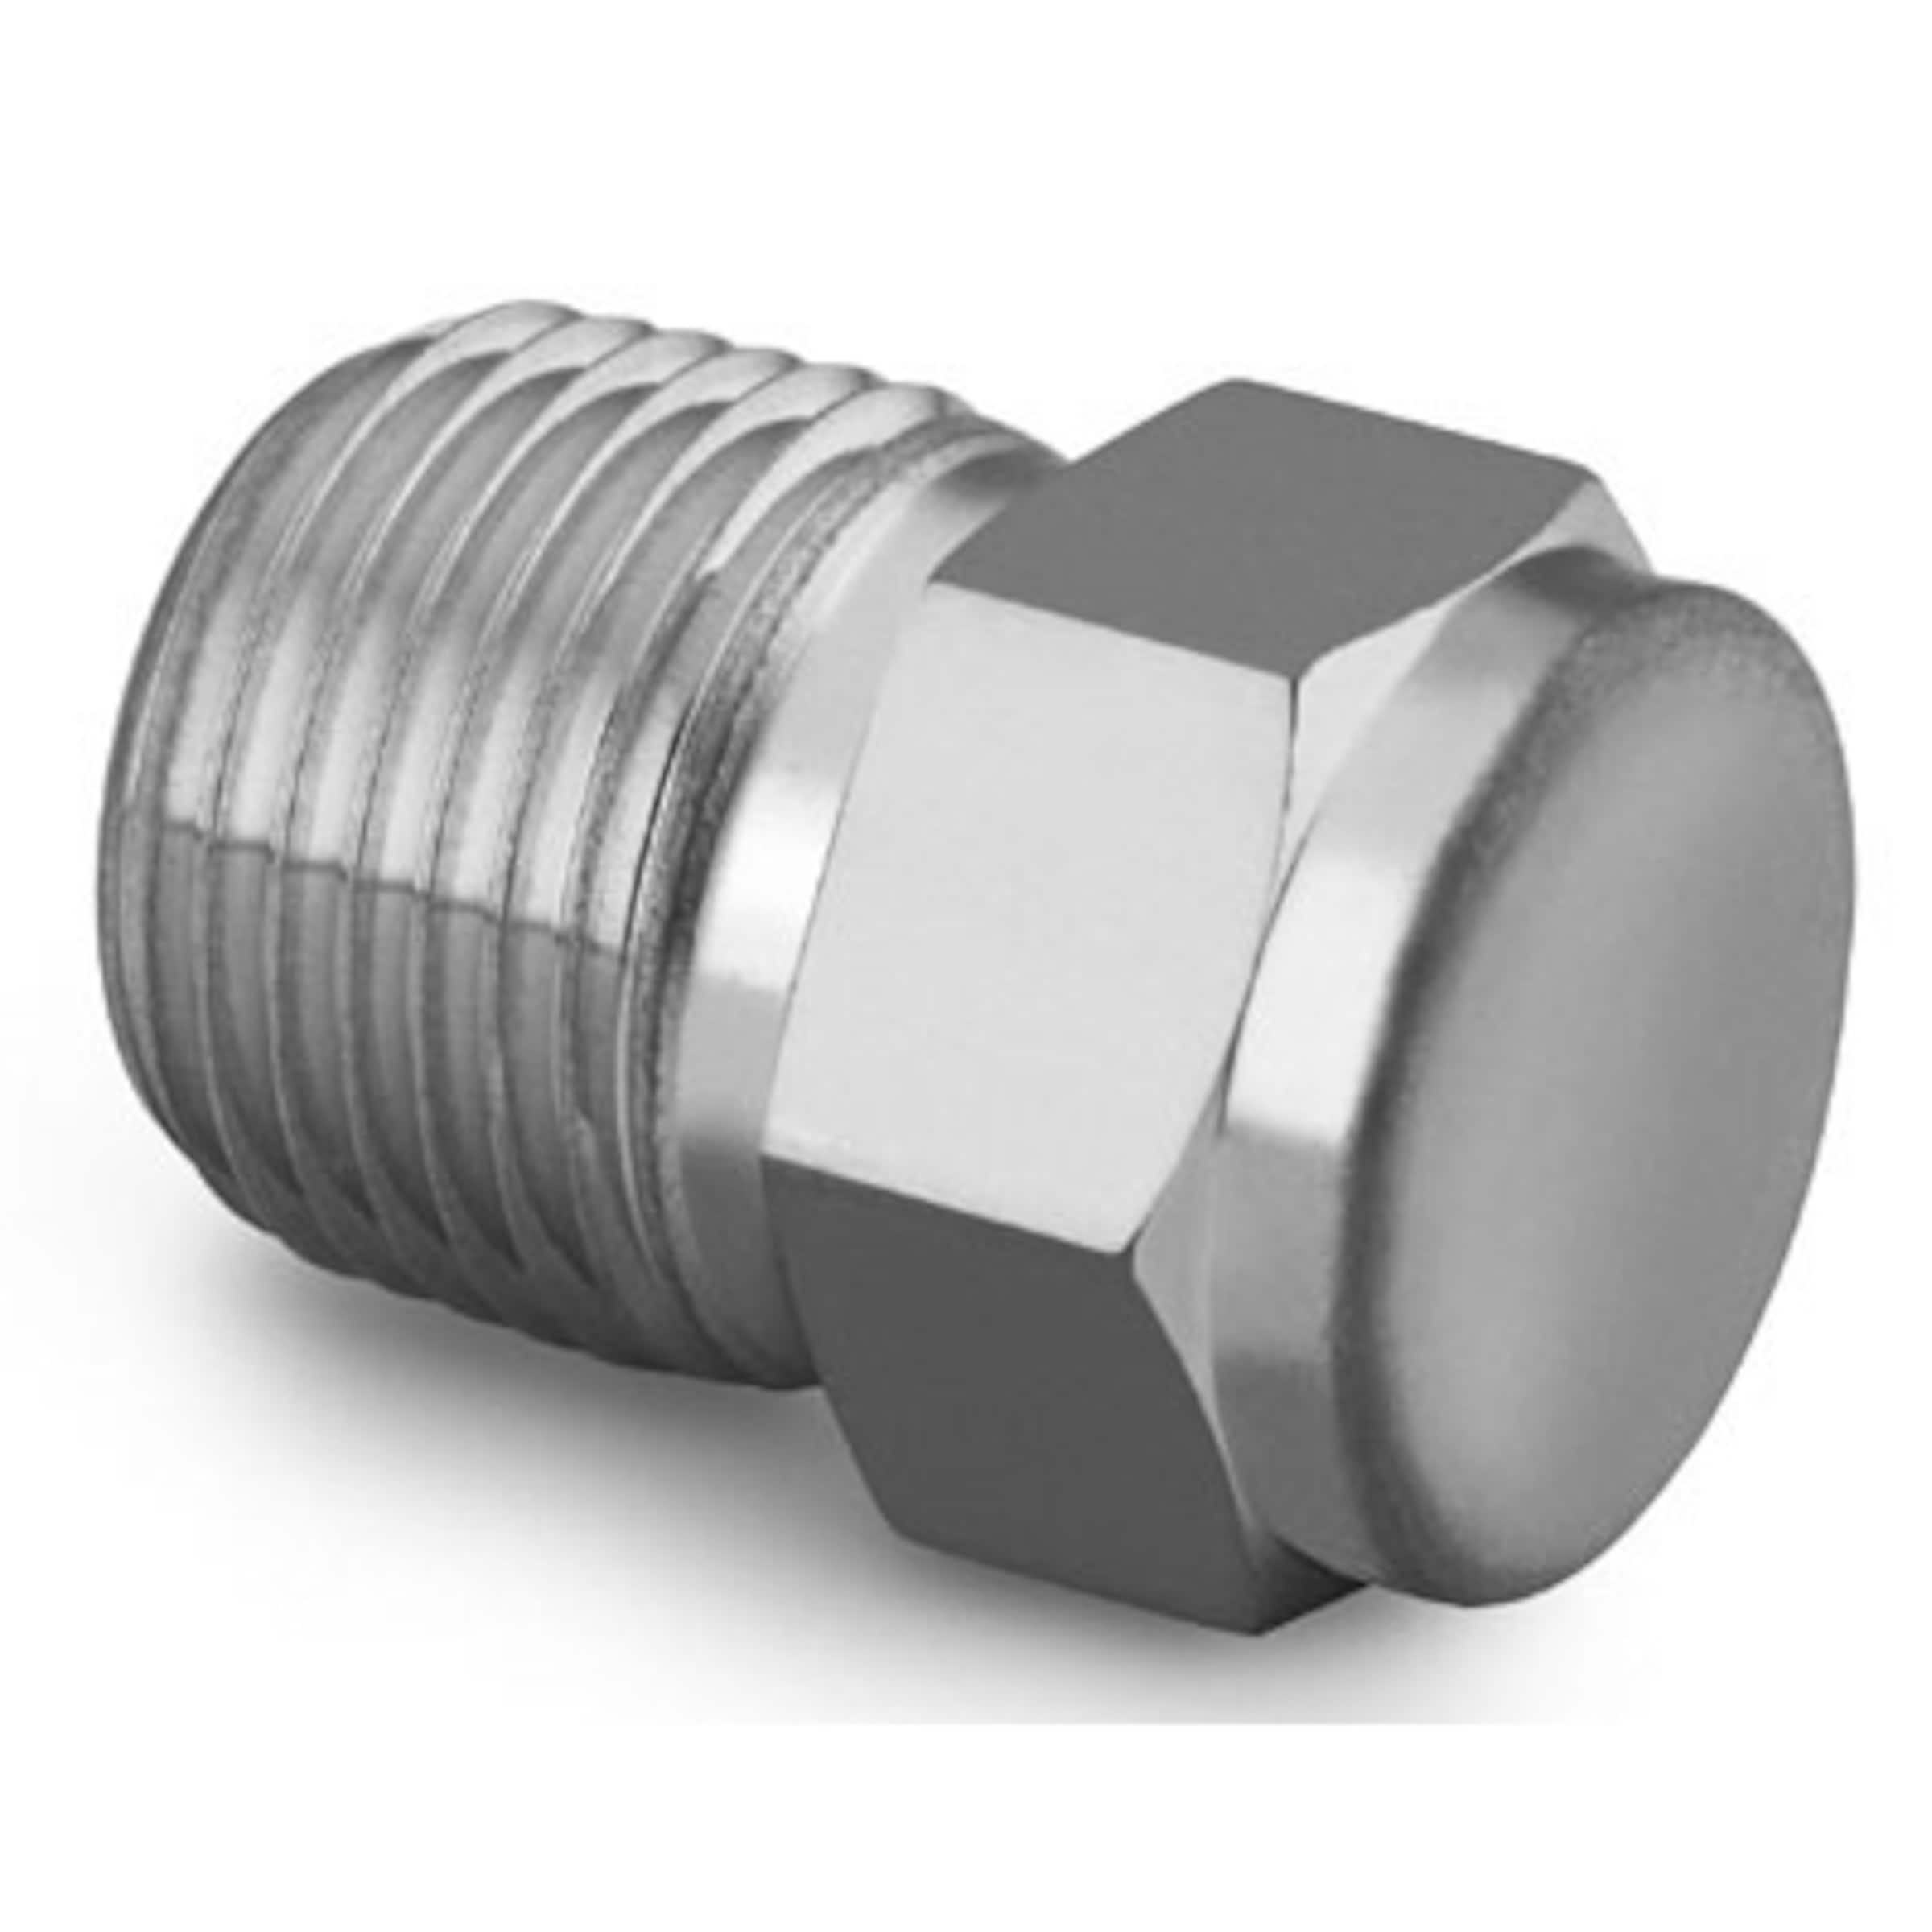 1/16 NPT Plug made in 316 Stainless Steel American Plug for 1/16 npt